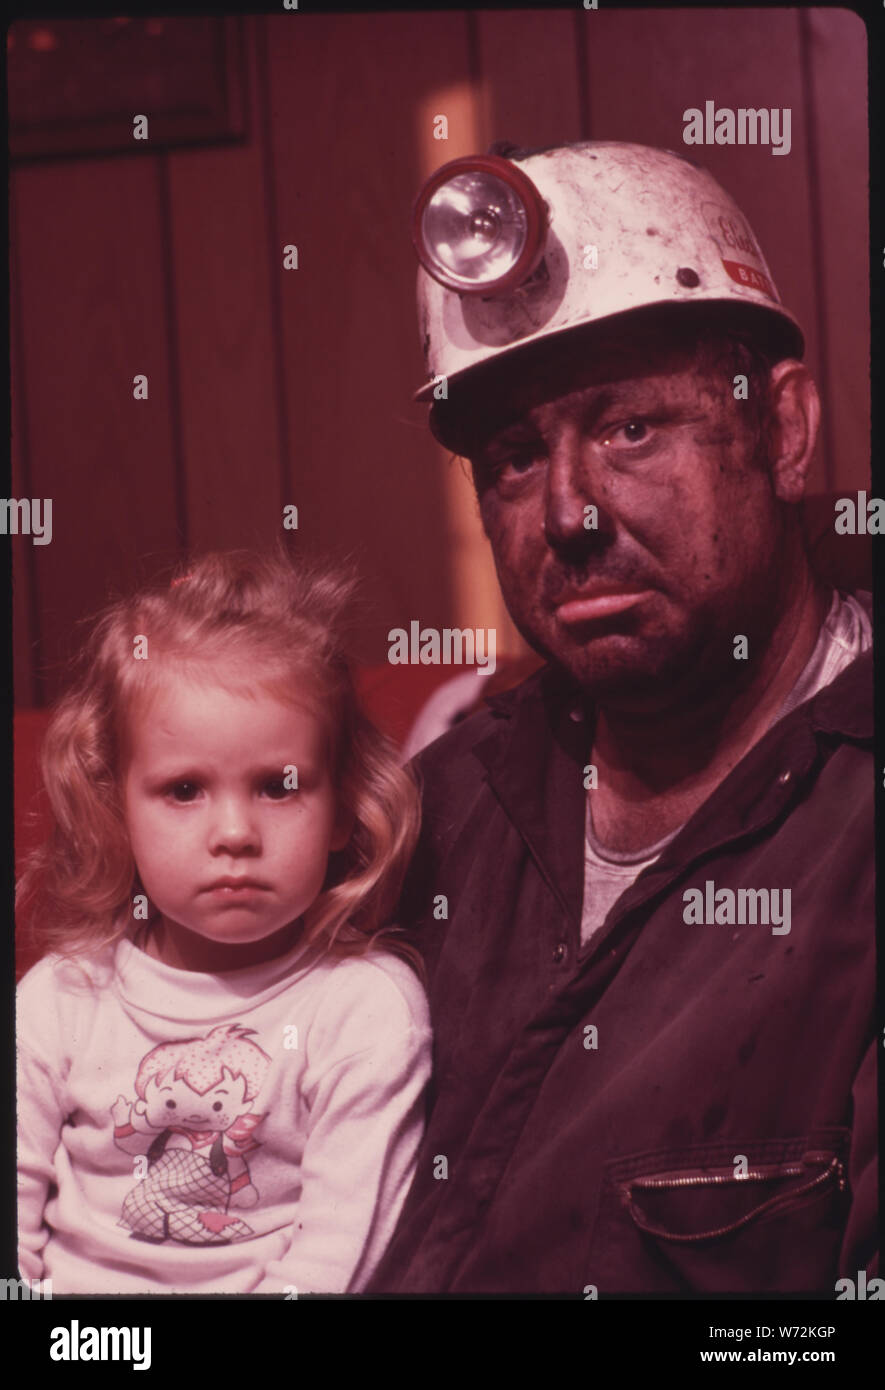 MINER WAYNE GIPSON, 39, WITH HIS DAUGHTER TABITHA, 3. HE HAS JUST GOTTEN HOME FROM HIS JOB AS A CONVEYOR BELT OPERATOR IN A NON-UNION MINE. AS SOON AS HE ARRIVES HE TAKES A SHOWER AND CHANGES INTO CLOTHES TO DO LIVESTOCK CHORES WITH HIS TWO SONS. GIPSON WAS BORN AND RAISED IN PALMER, TENNESSEE, BUT NOW LIVES WITH HIS FAMILY NEAR GRUETLI, NEAR CHATTANOOGA. HE MOVED NORTH TO WORK AND MARRIED THERE, BUT RETURNED BECAUSE HE AND HIS WIFE THINK IT IS A BETTER PLACE TO LIVE Stock Photo